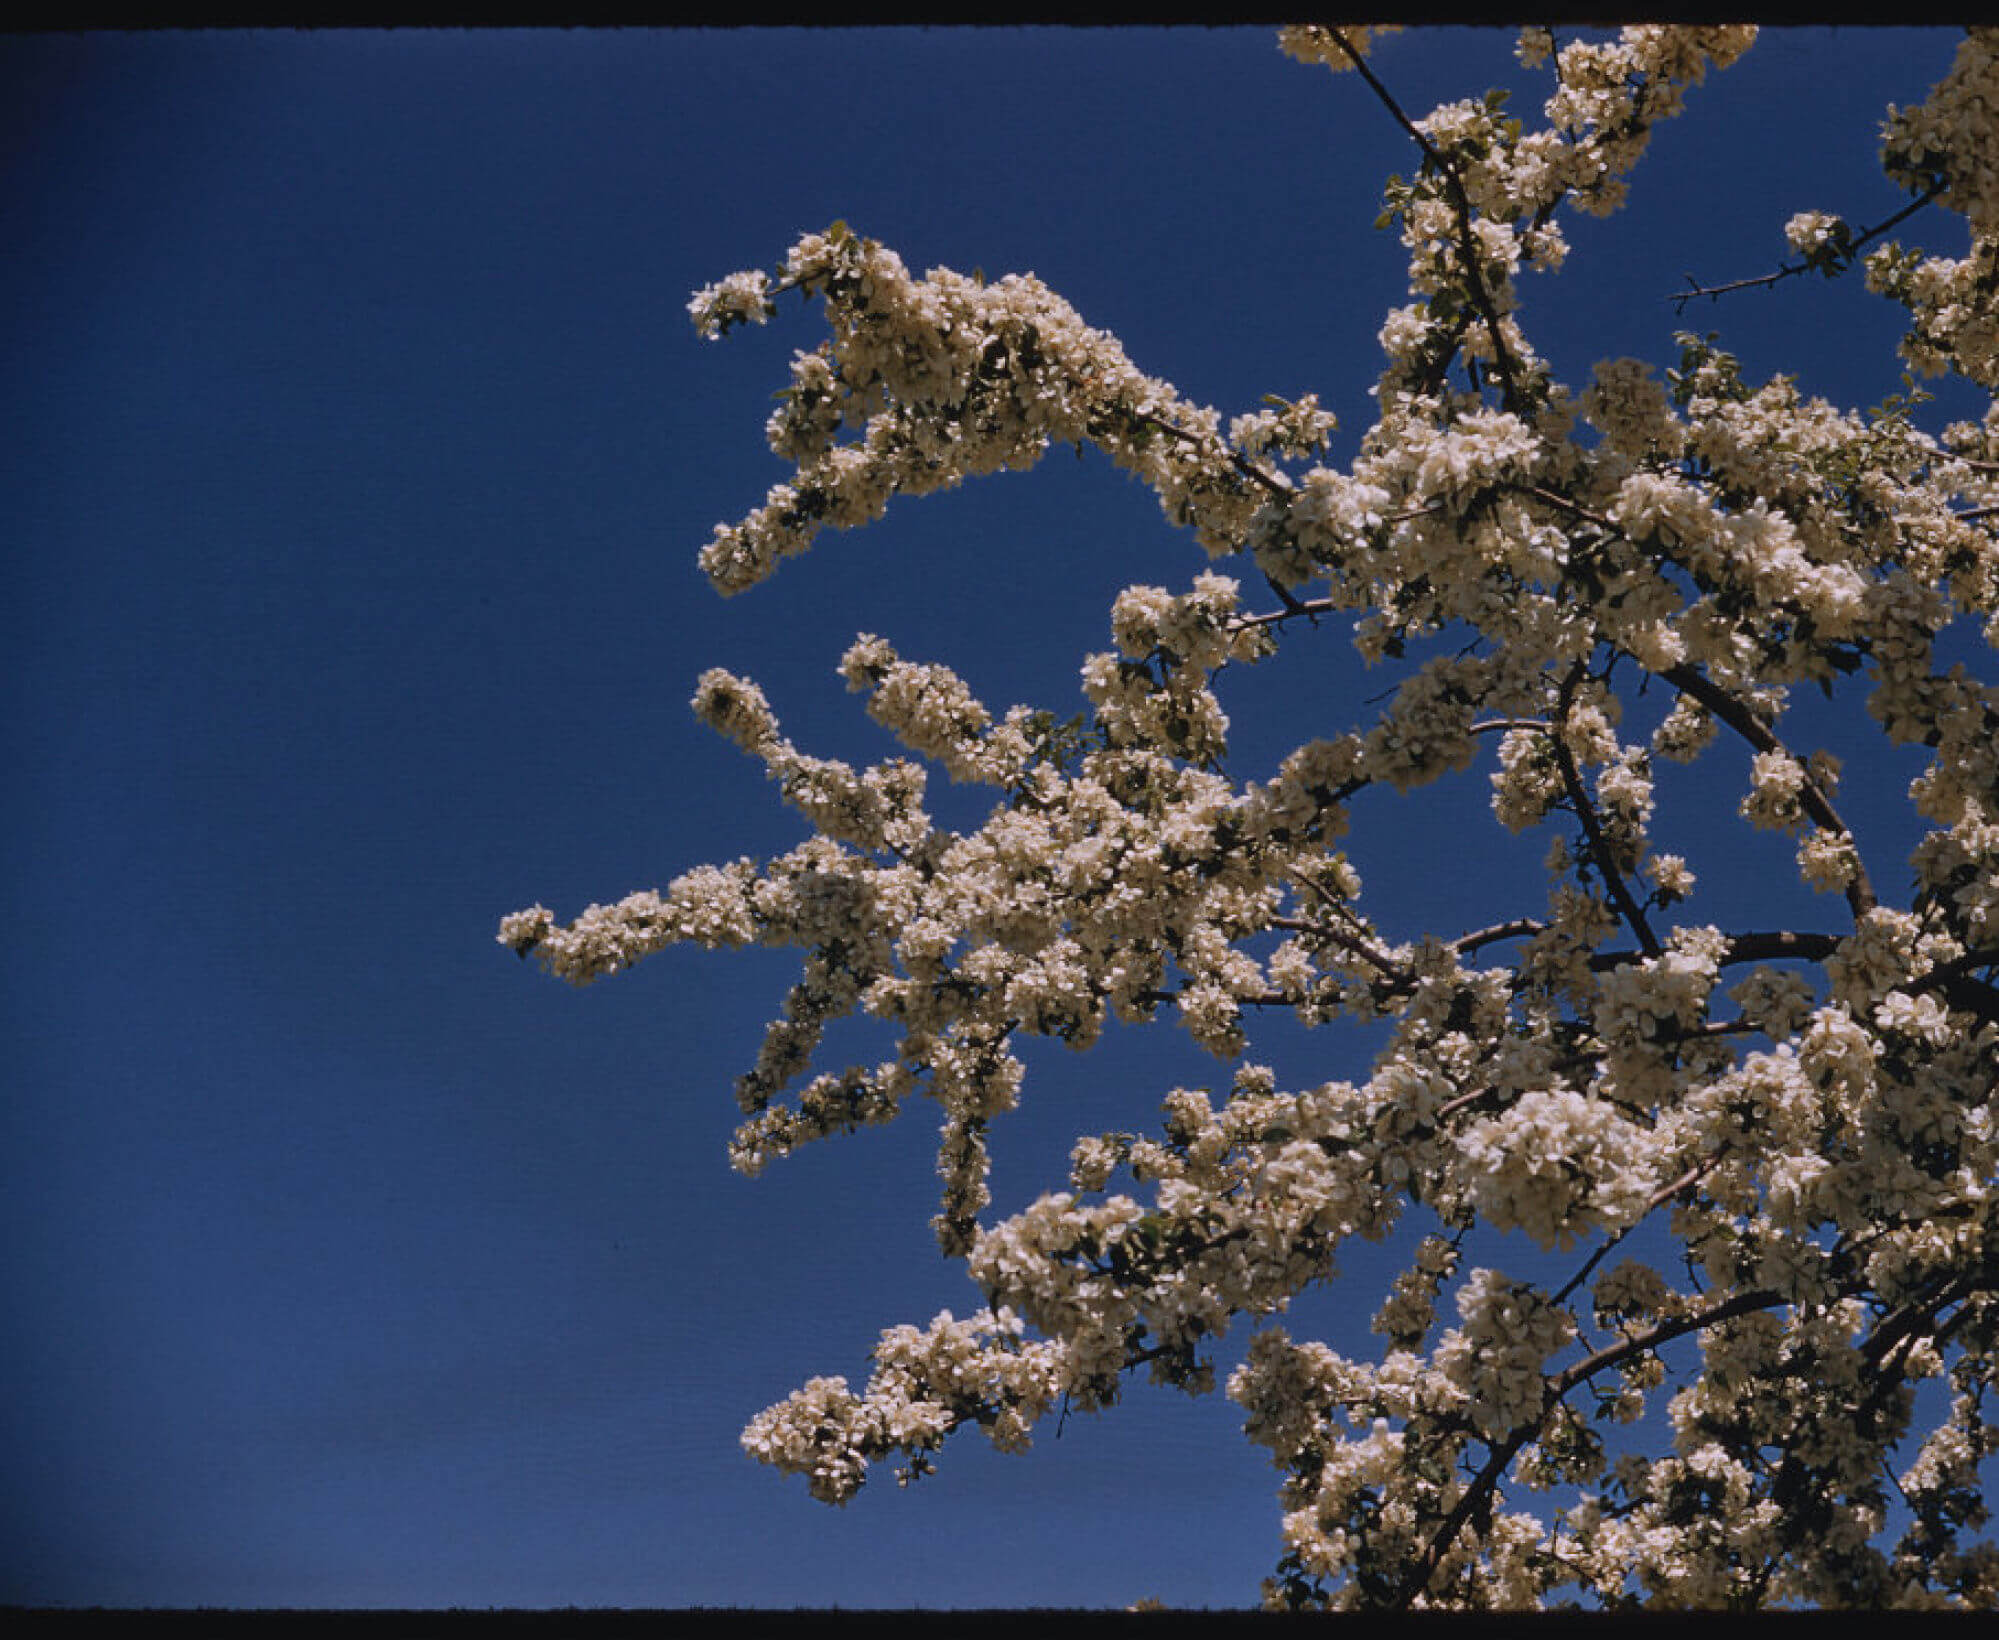 Apple blossoms bloom on branches which appear against a bright blue sky.